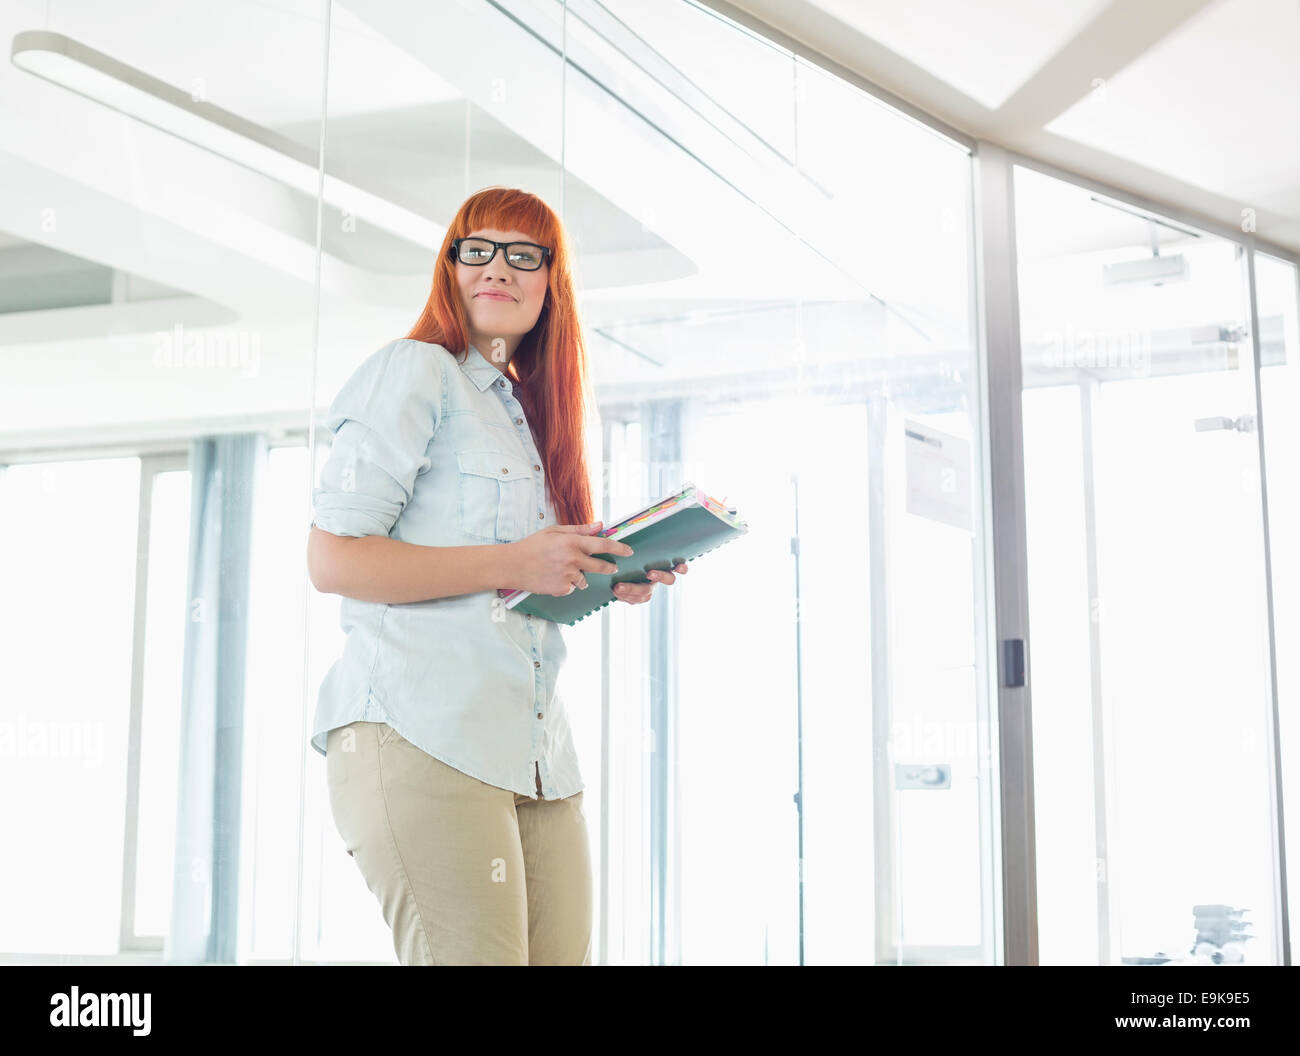 Creative businesswoman looking away while holding files in office Stock Photo